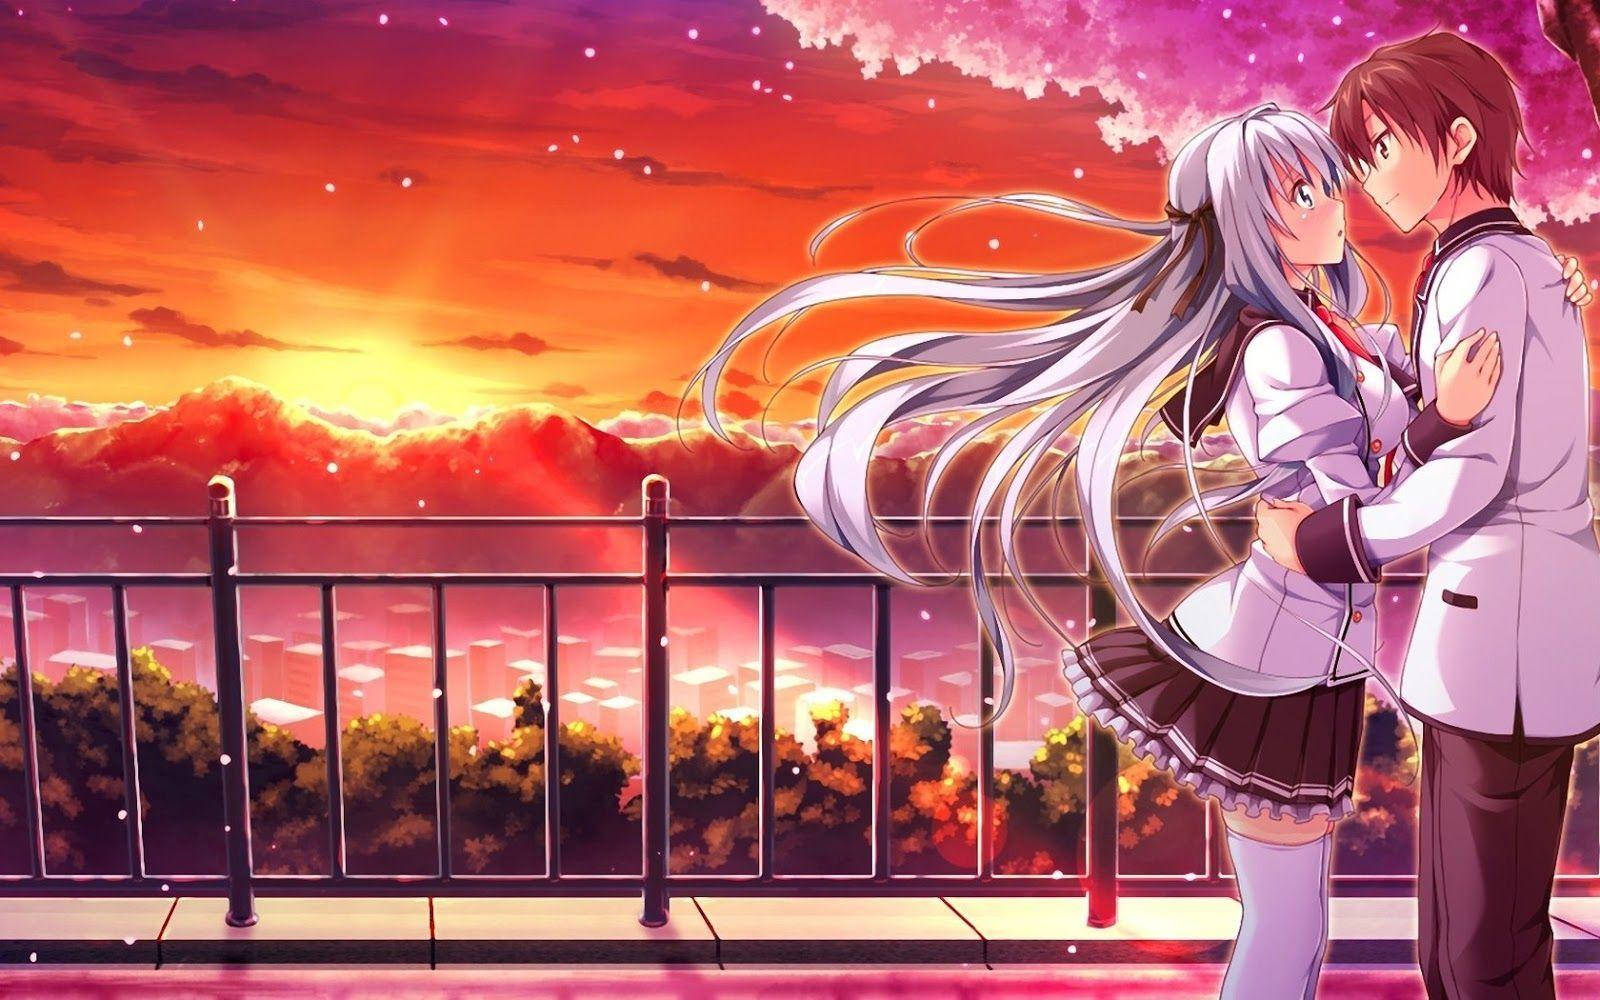 Download Anime School Scenery Cute Couple Rooftop Sunset Wallpaper |  